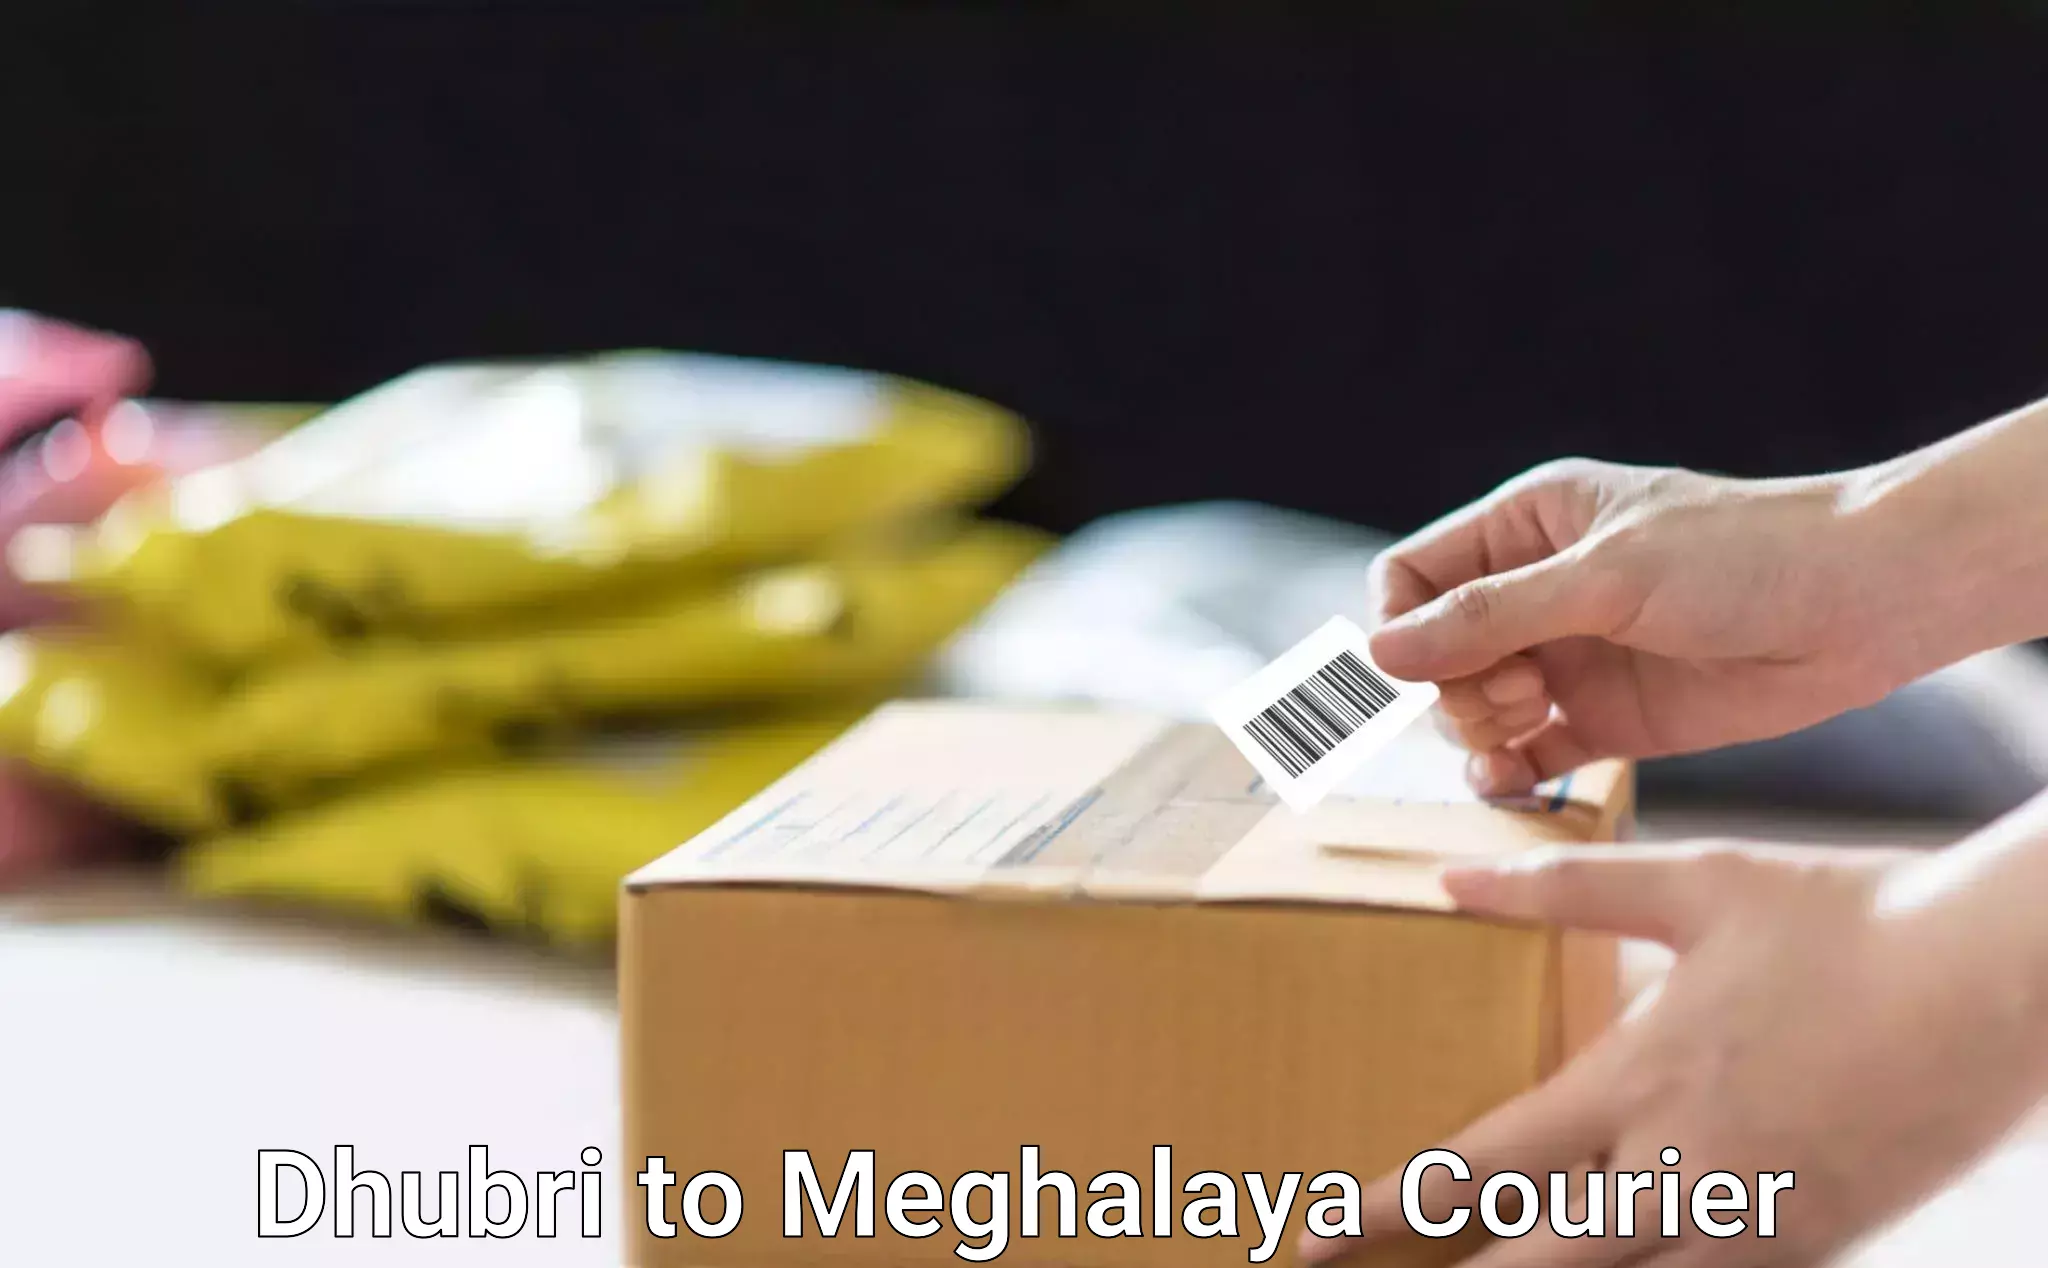 Professional courier handling in Dhubri to Meghalaya